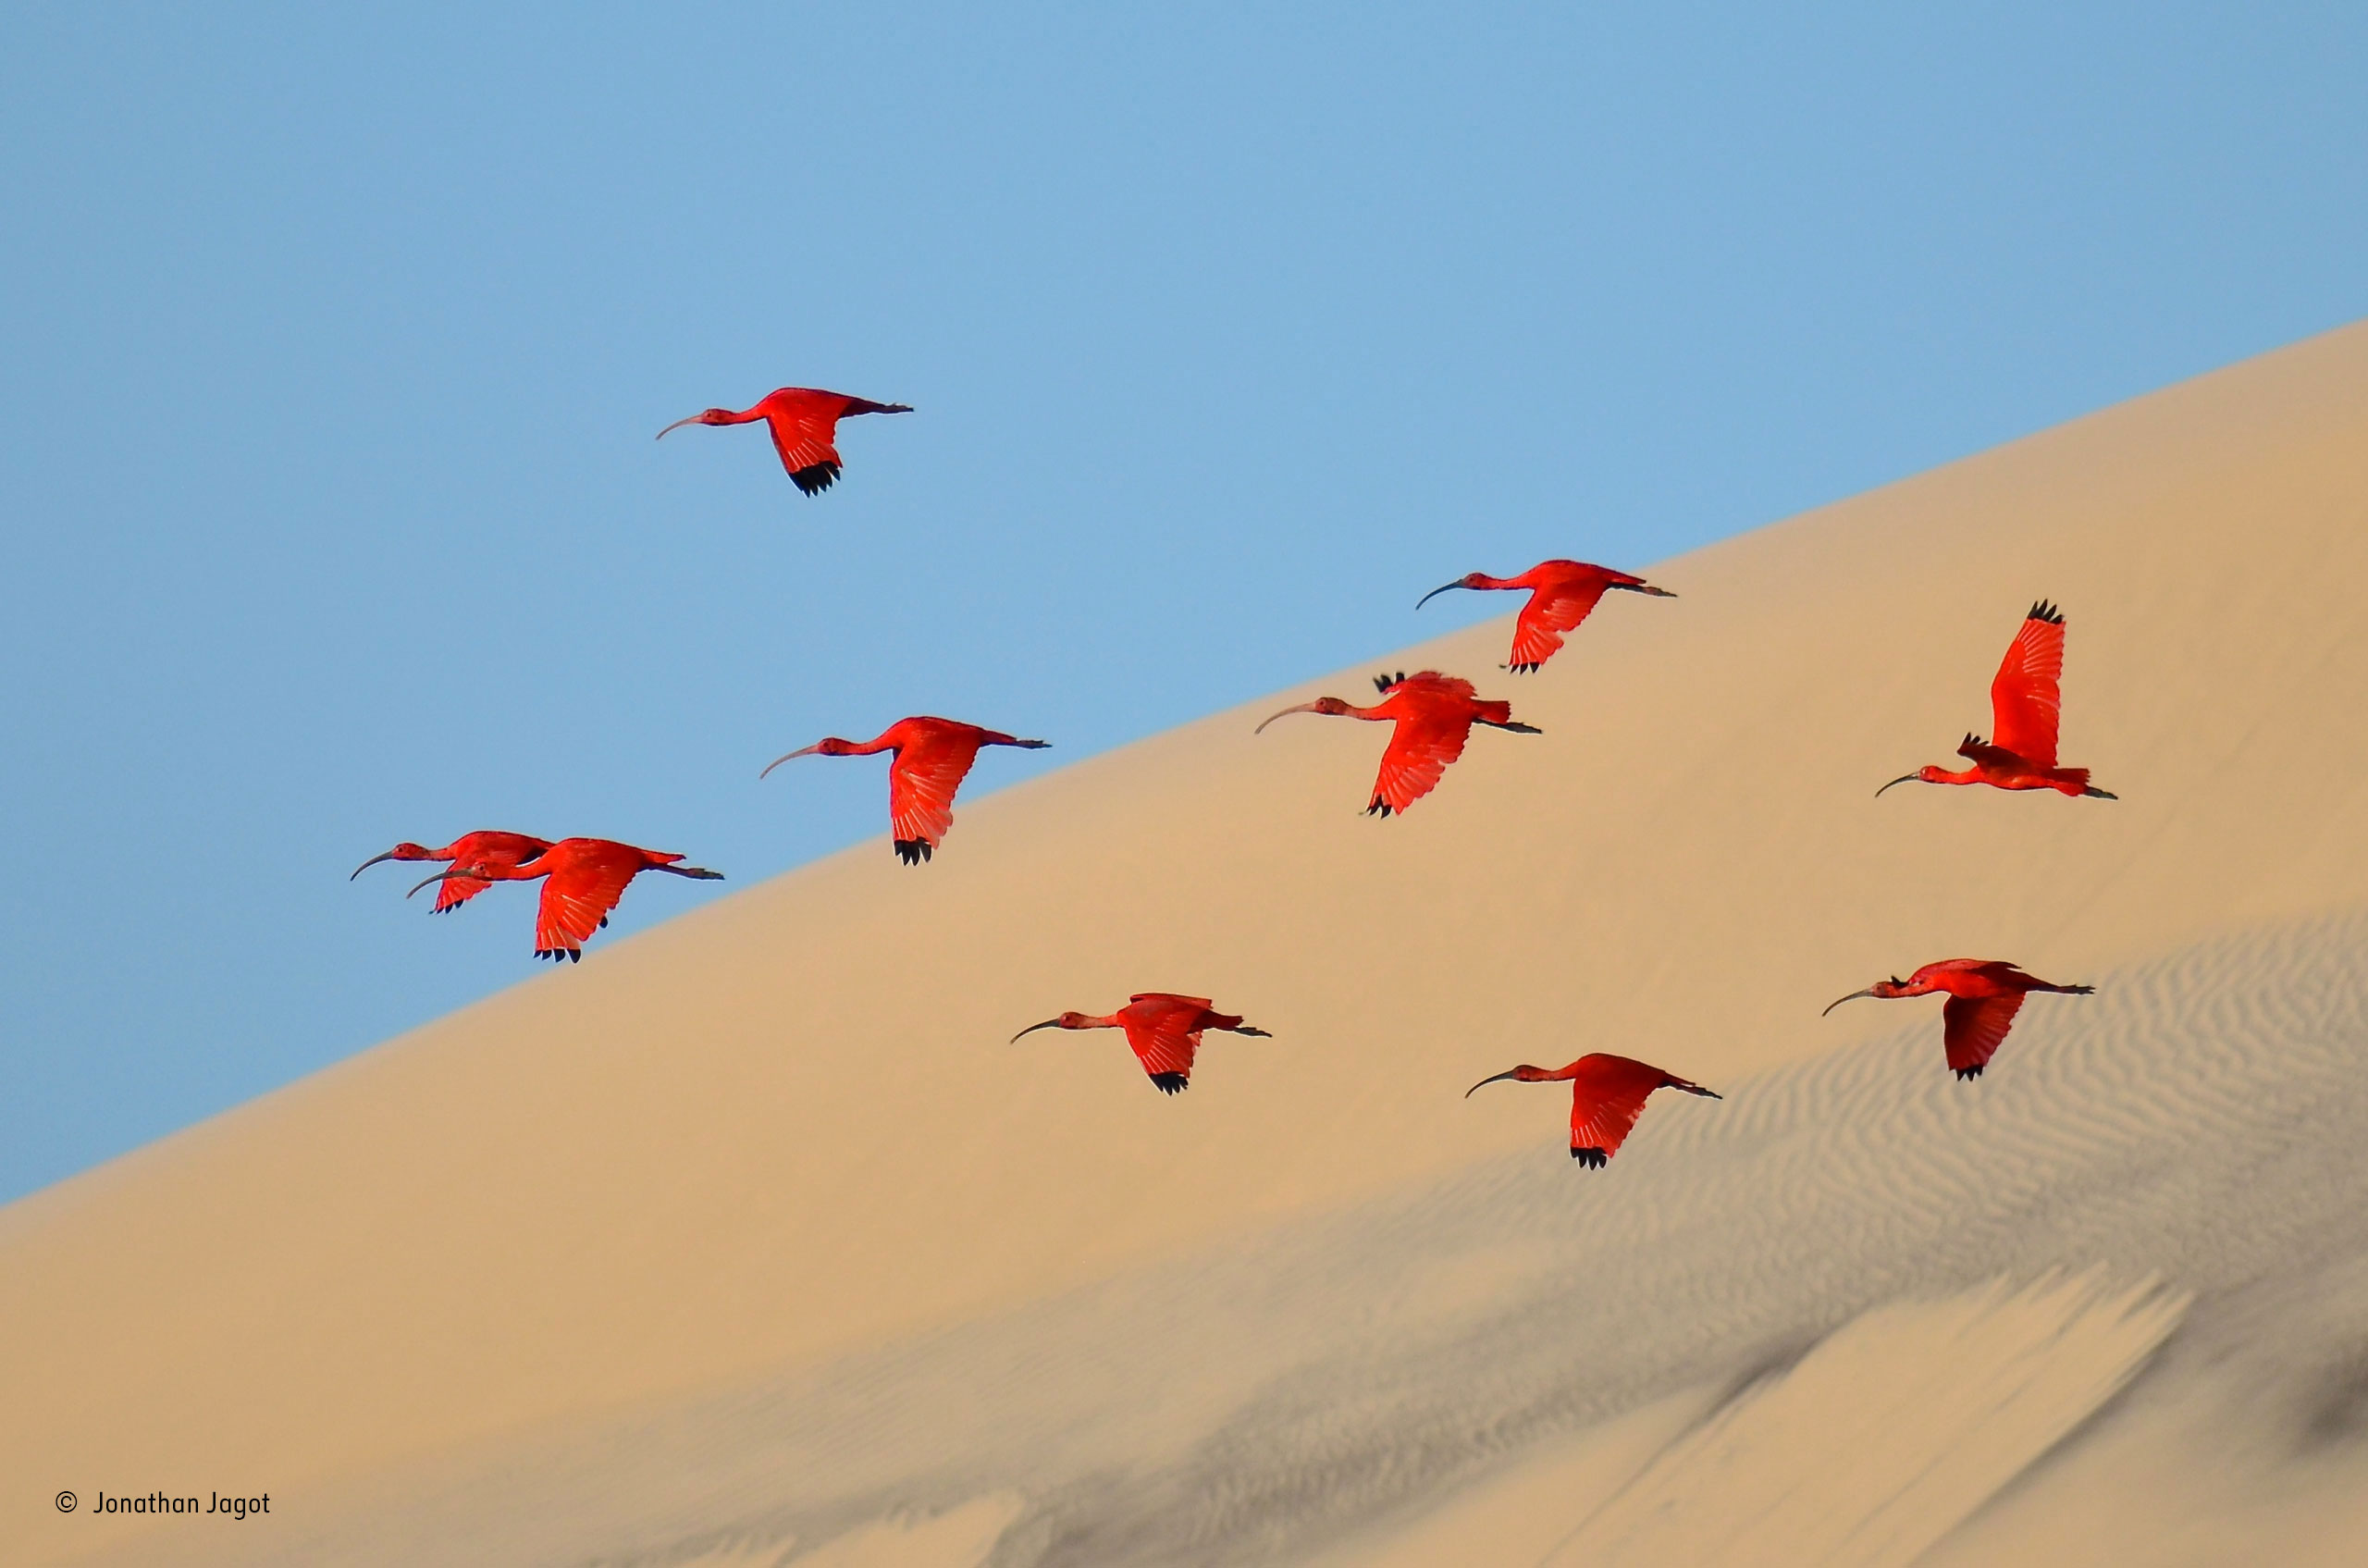 Jonathan Jagot (France) – Flight of the scarlet ibis 15 to 17 Years / Wildlife Photographer of the Year 2015 